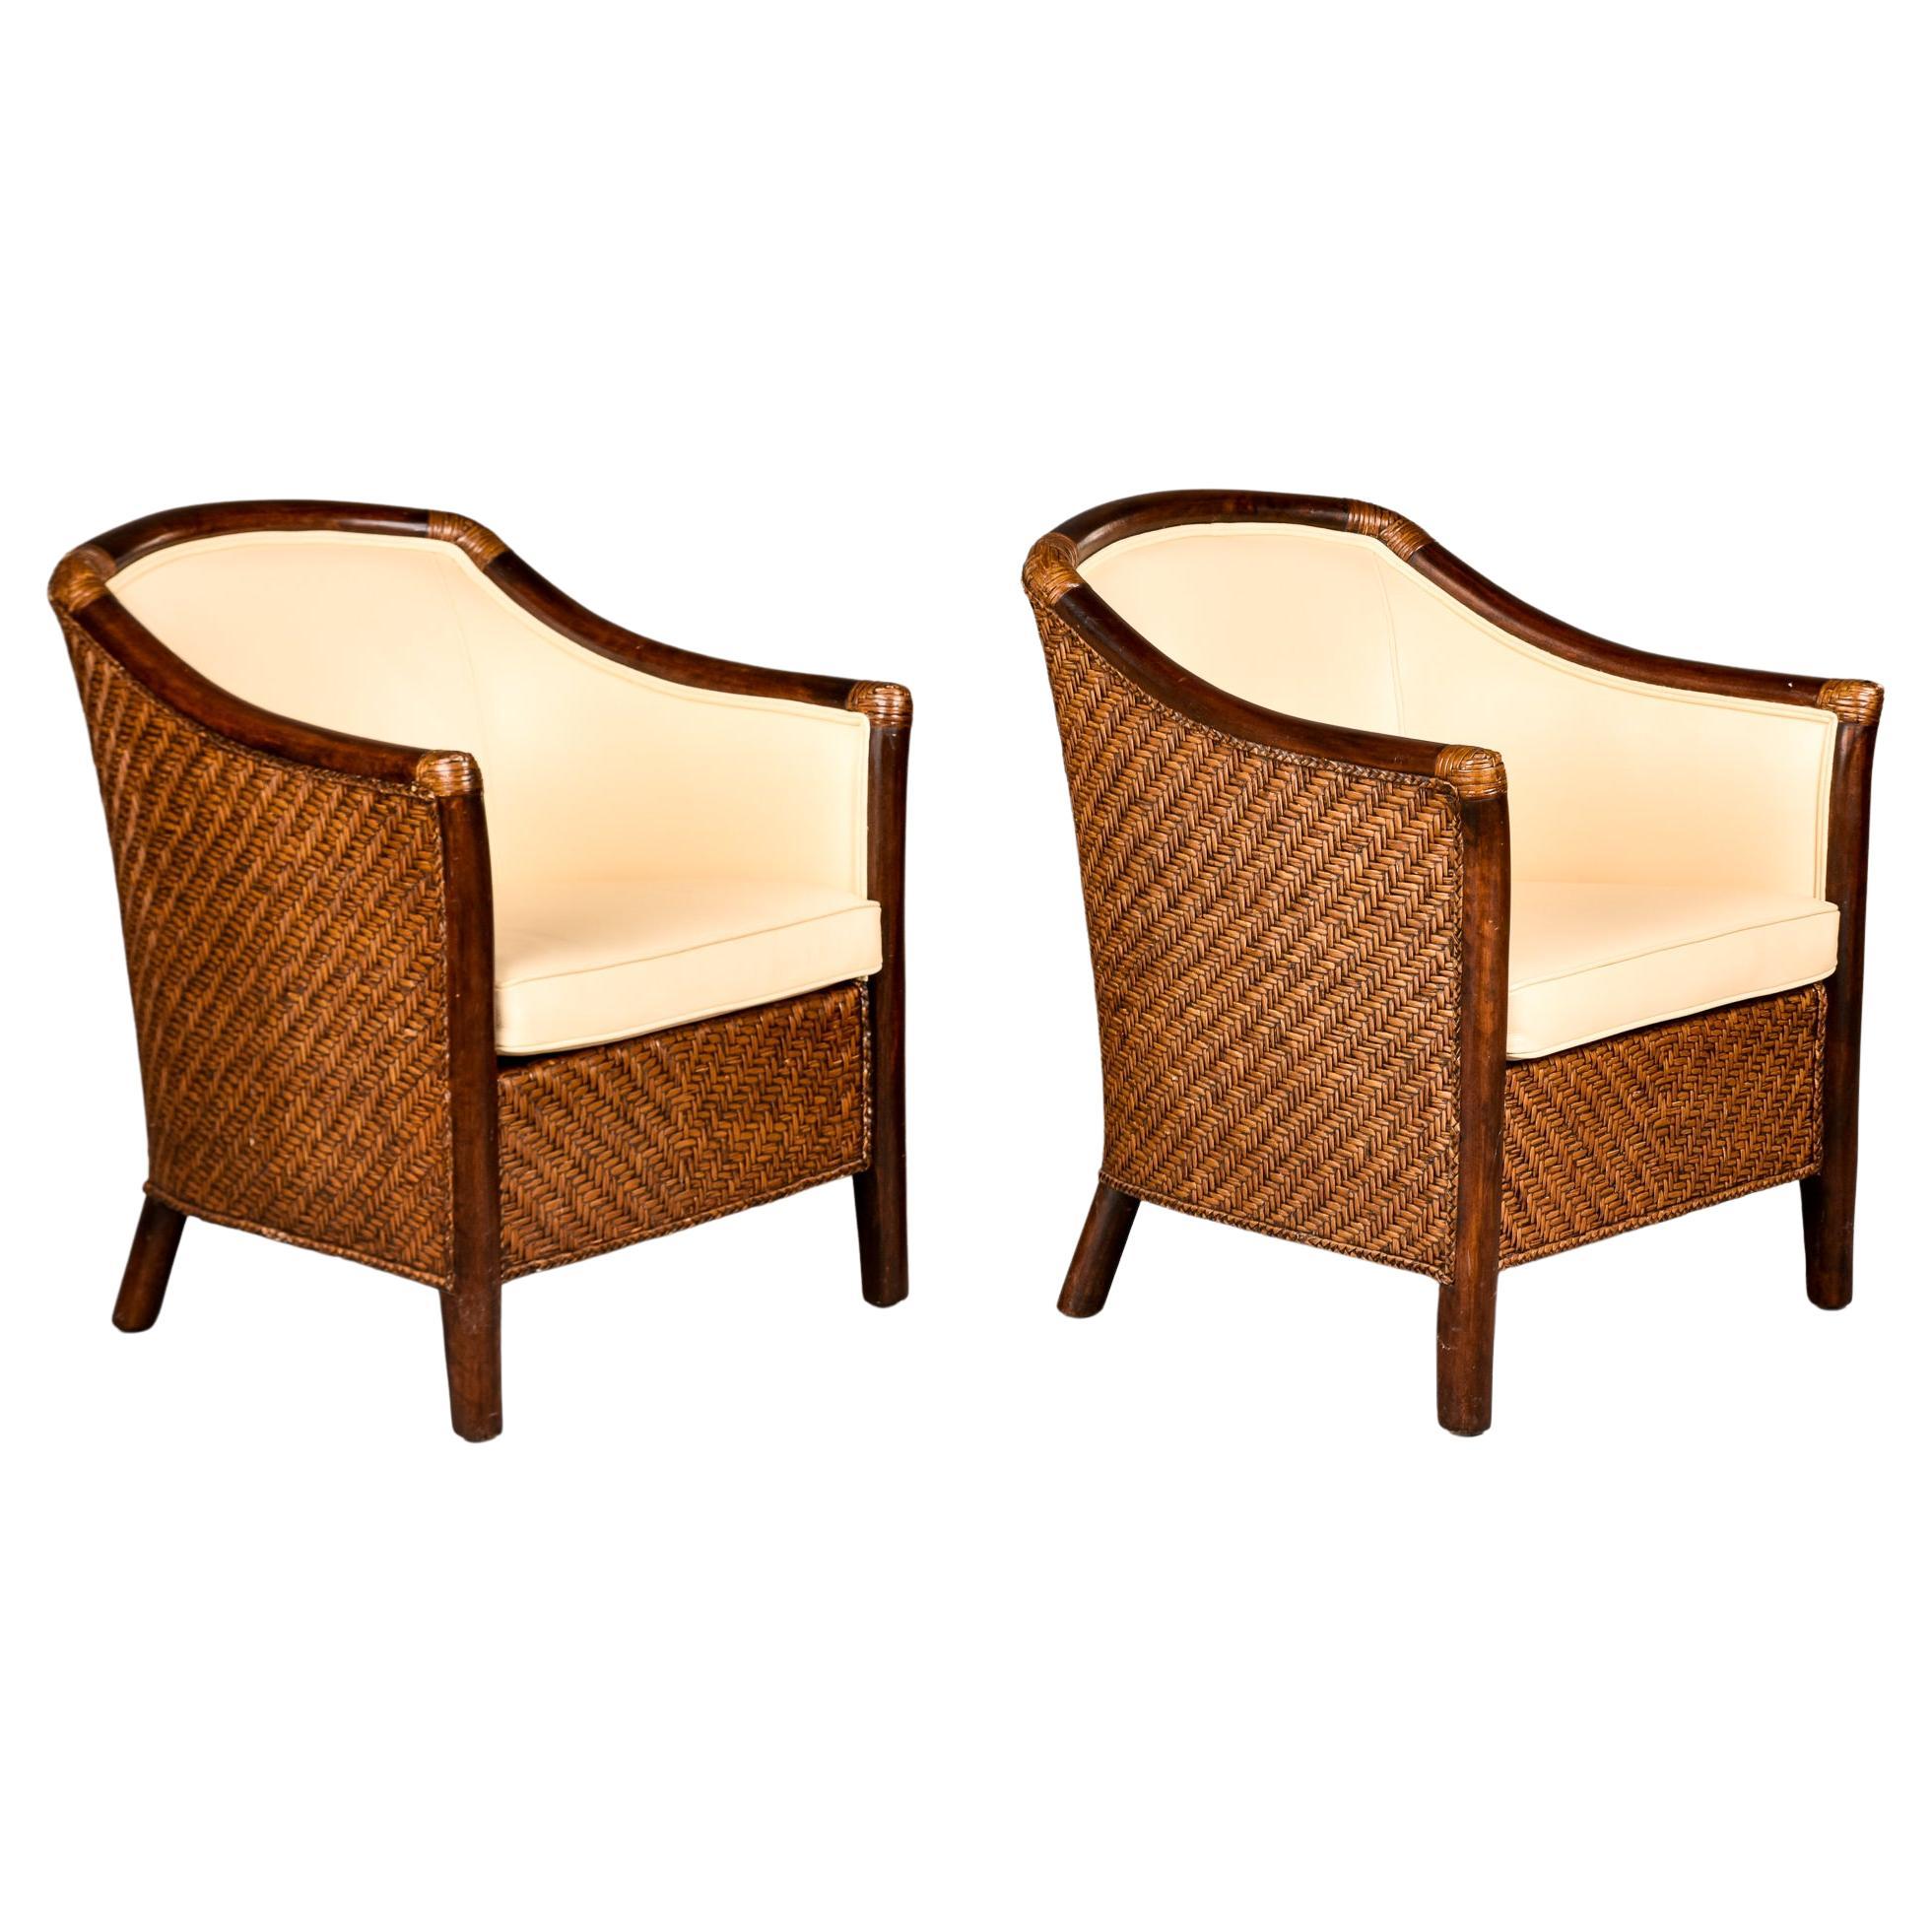 Pair Art Deco Wicker Club Chairs with New Leather Upholstery For Sale